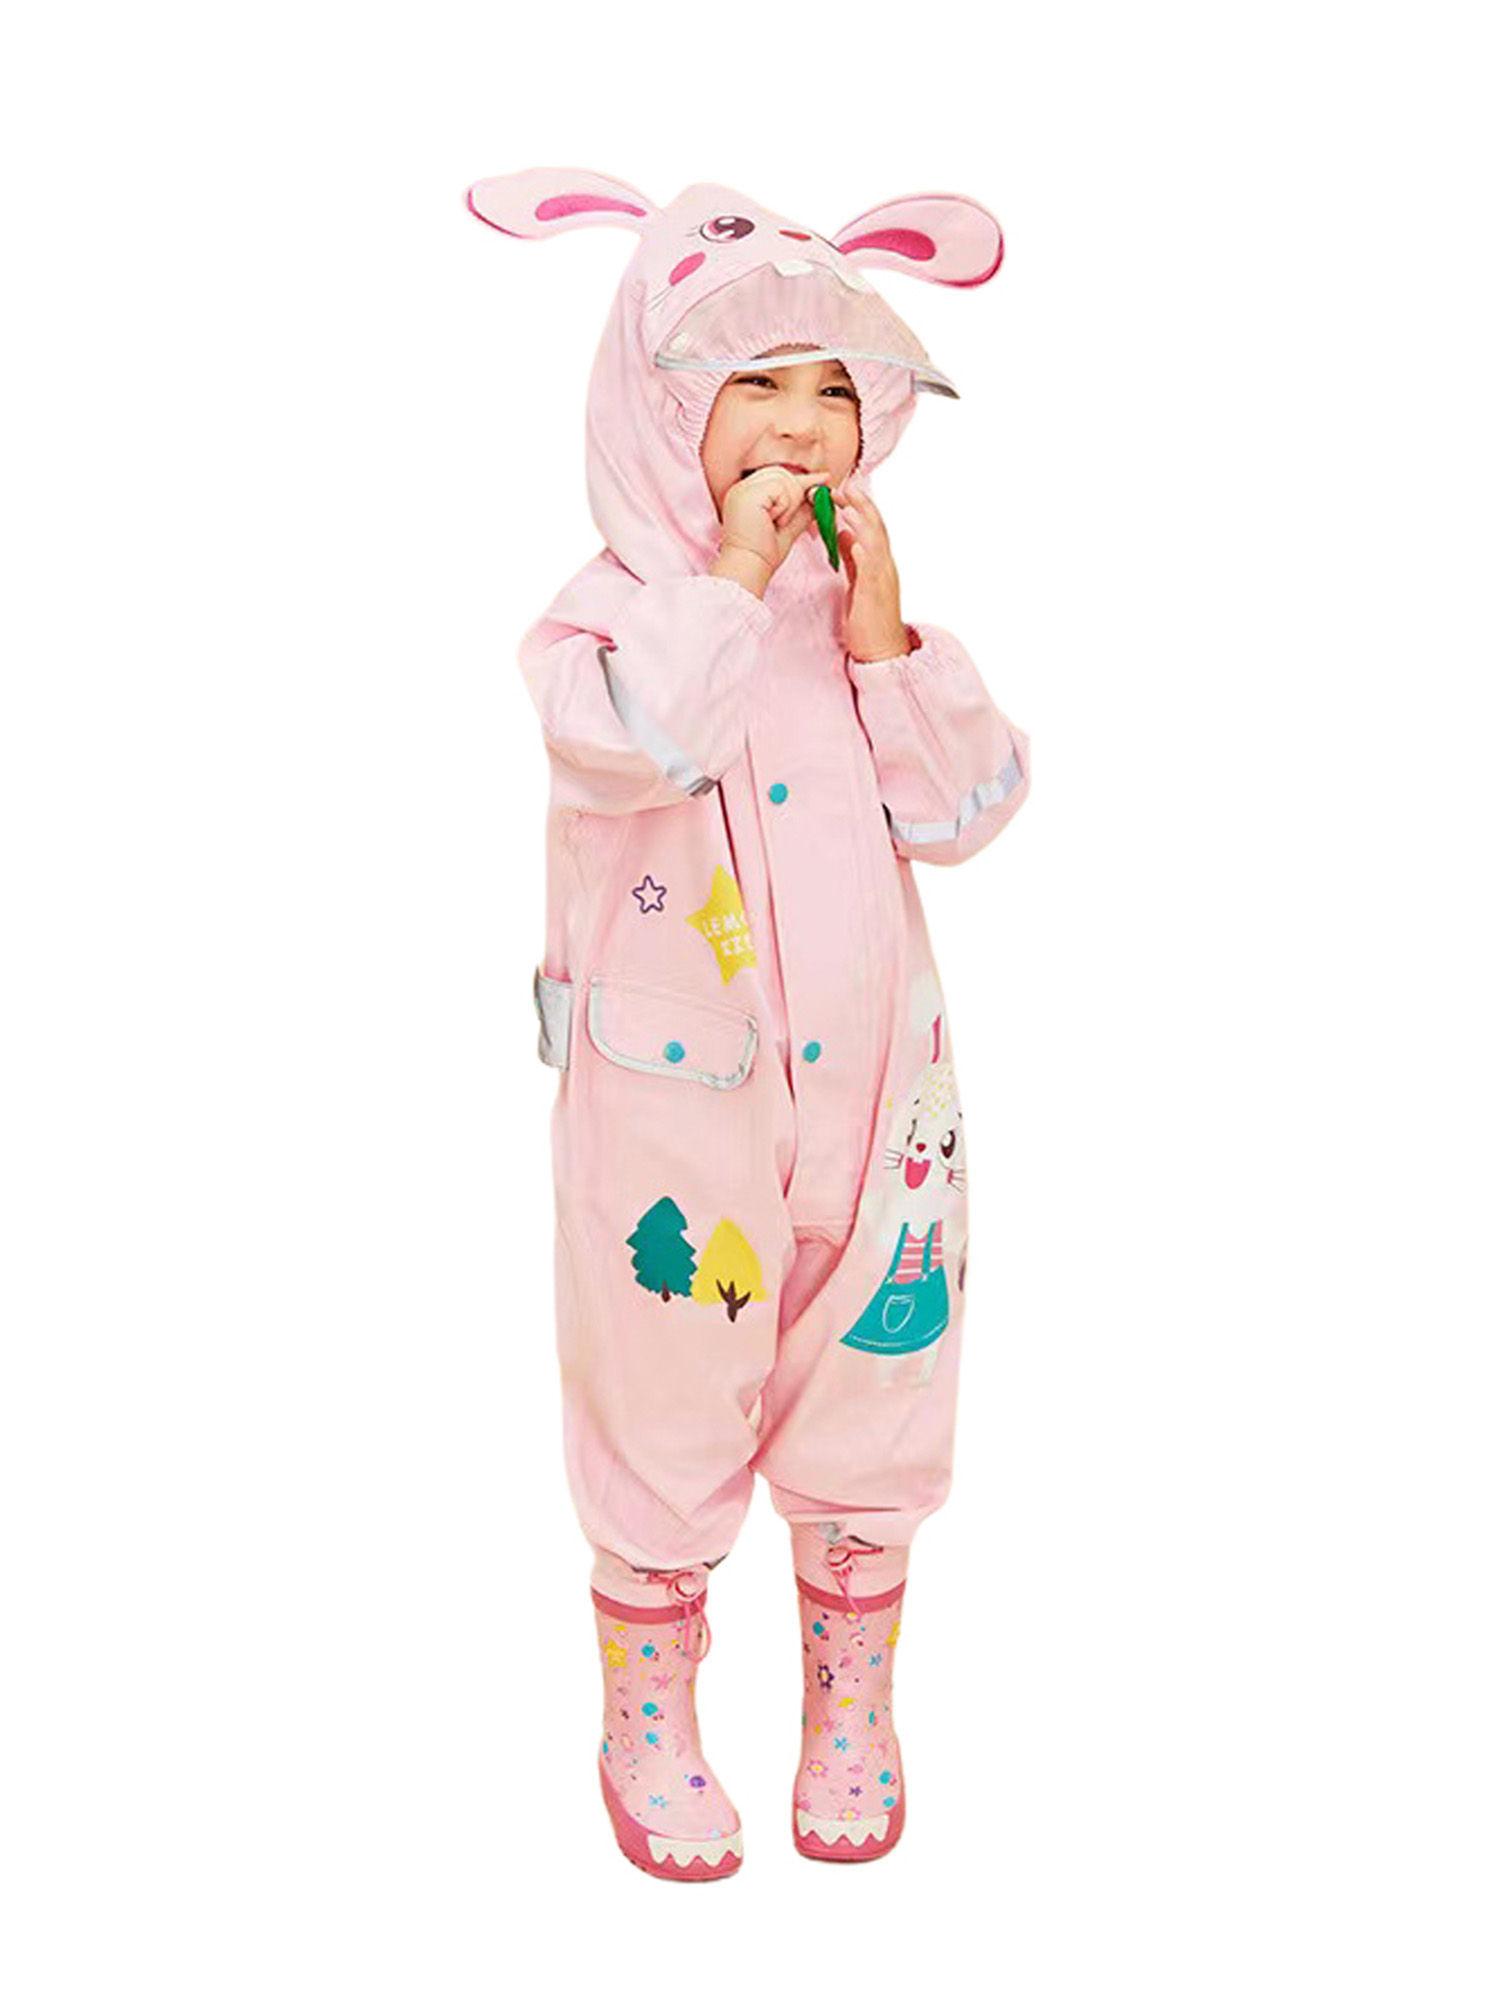 all over raincoat for kids-baby pink rabbit theme